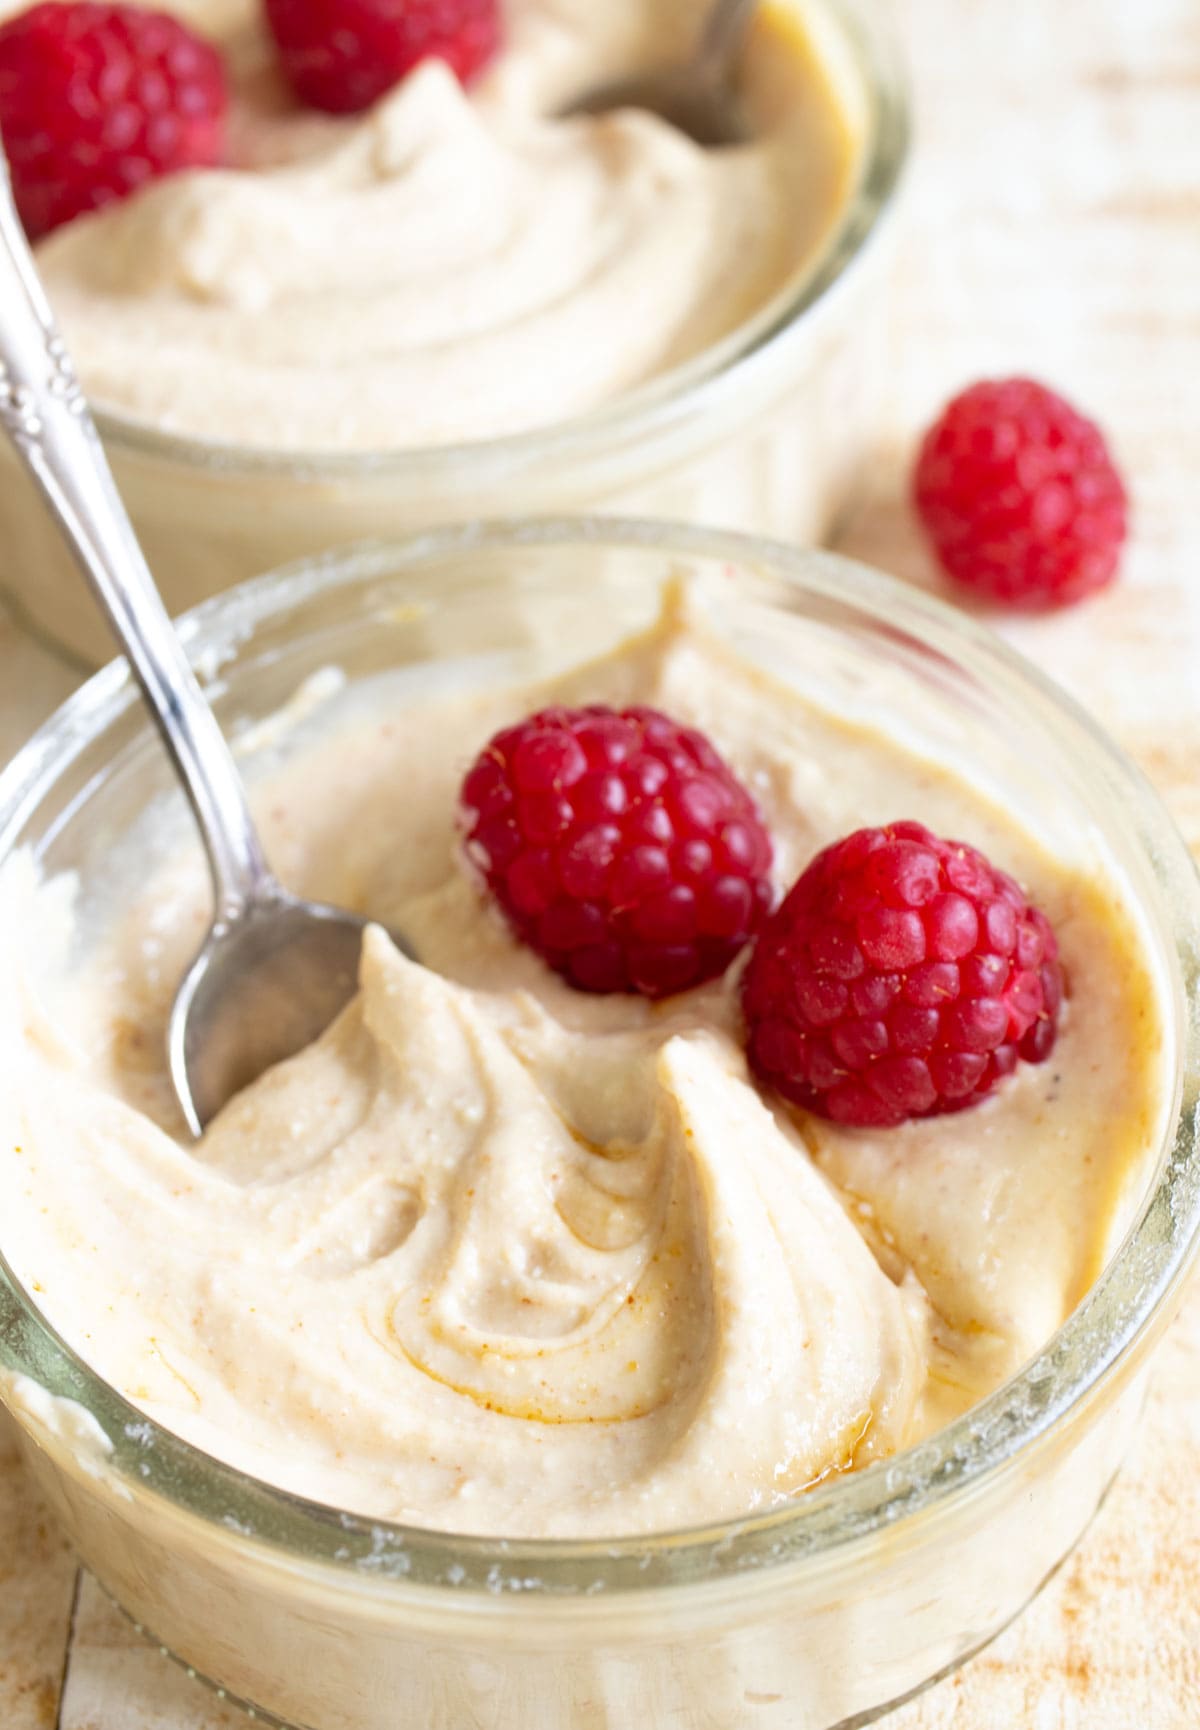 Peanut butter protein fluff in a glass bowl with raspberries and a spoon.